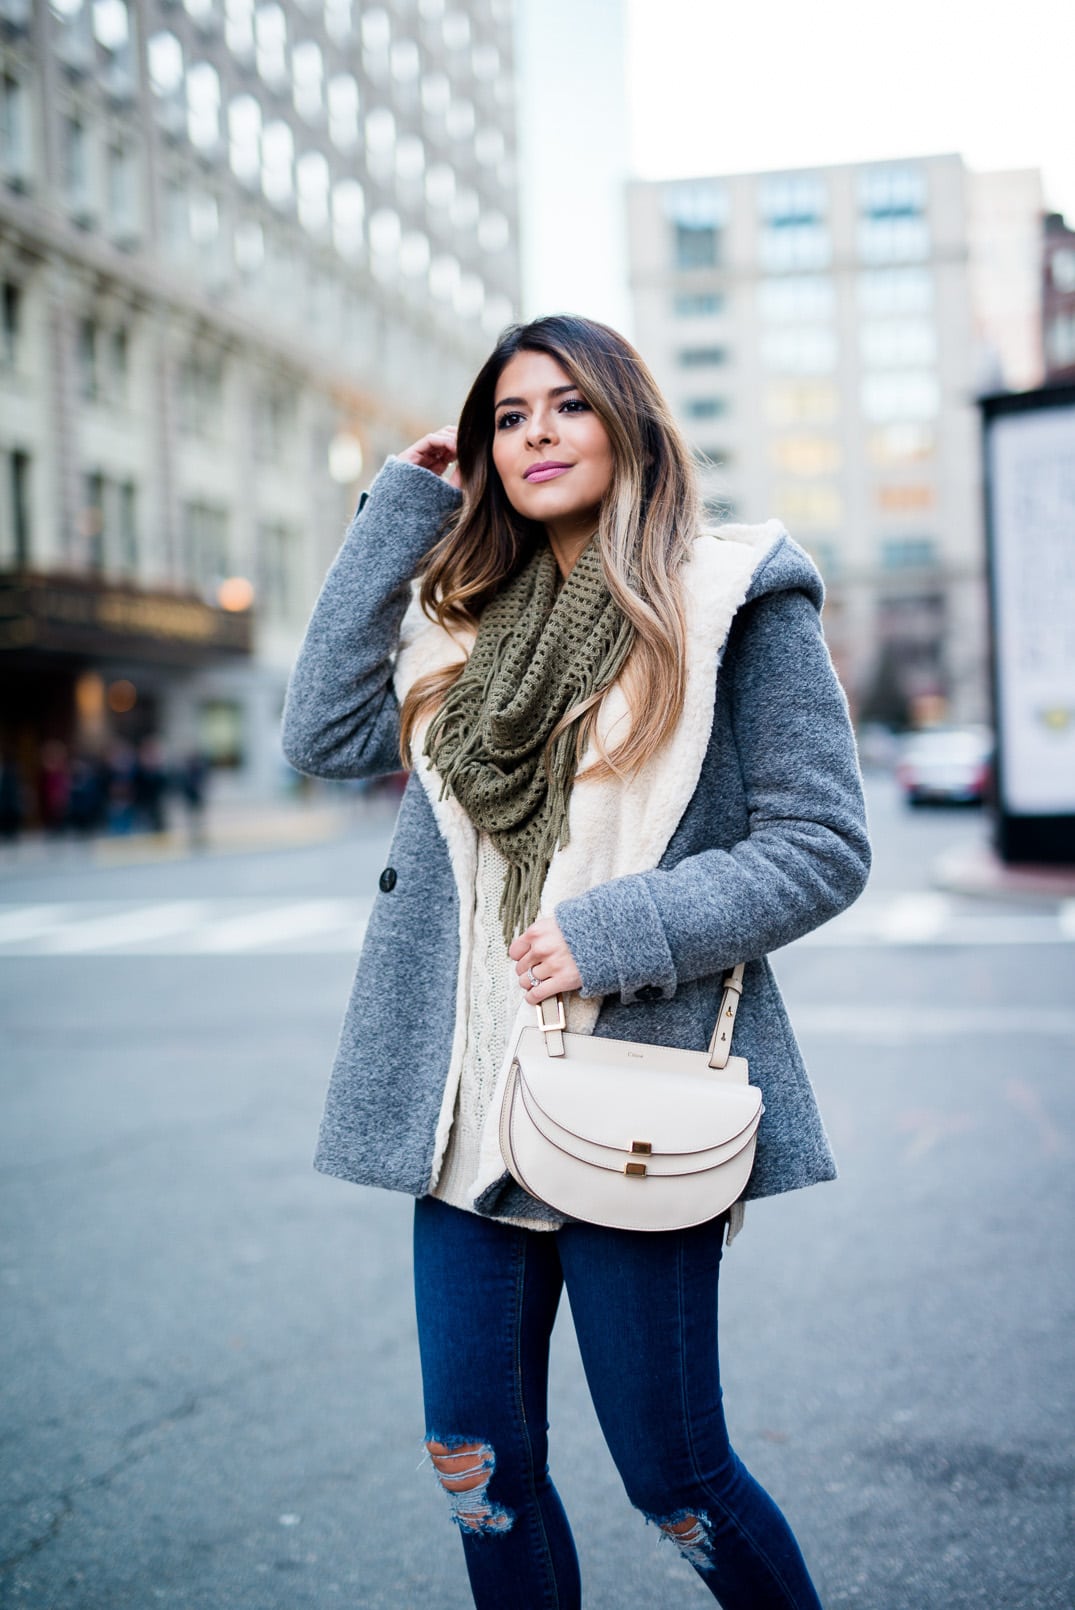 How to wear pastels in fall and winter - Christinabtv  Louis vuitton shoes  heels, Fashion, White ripped jeans